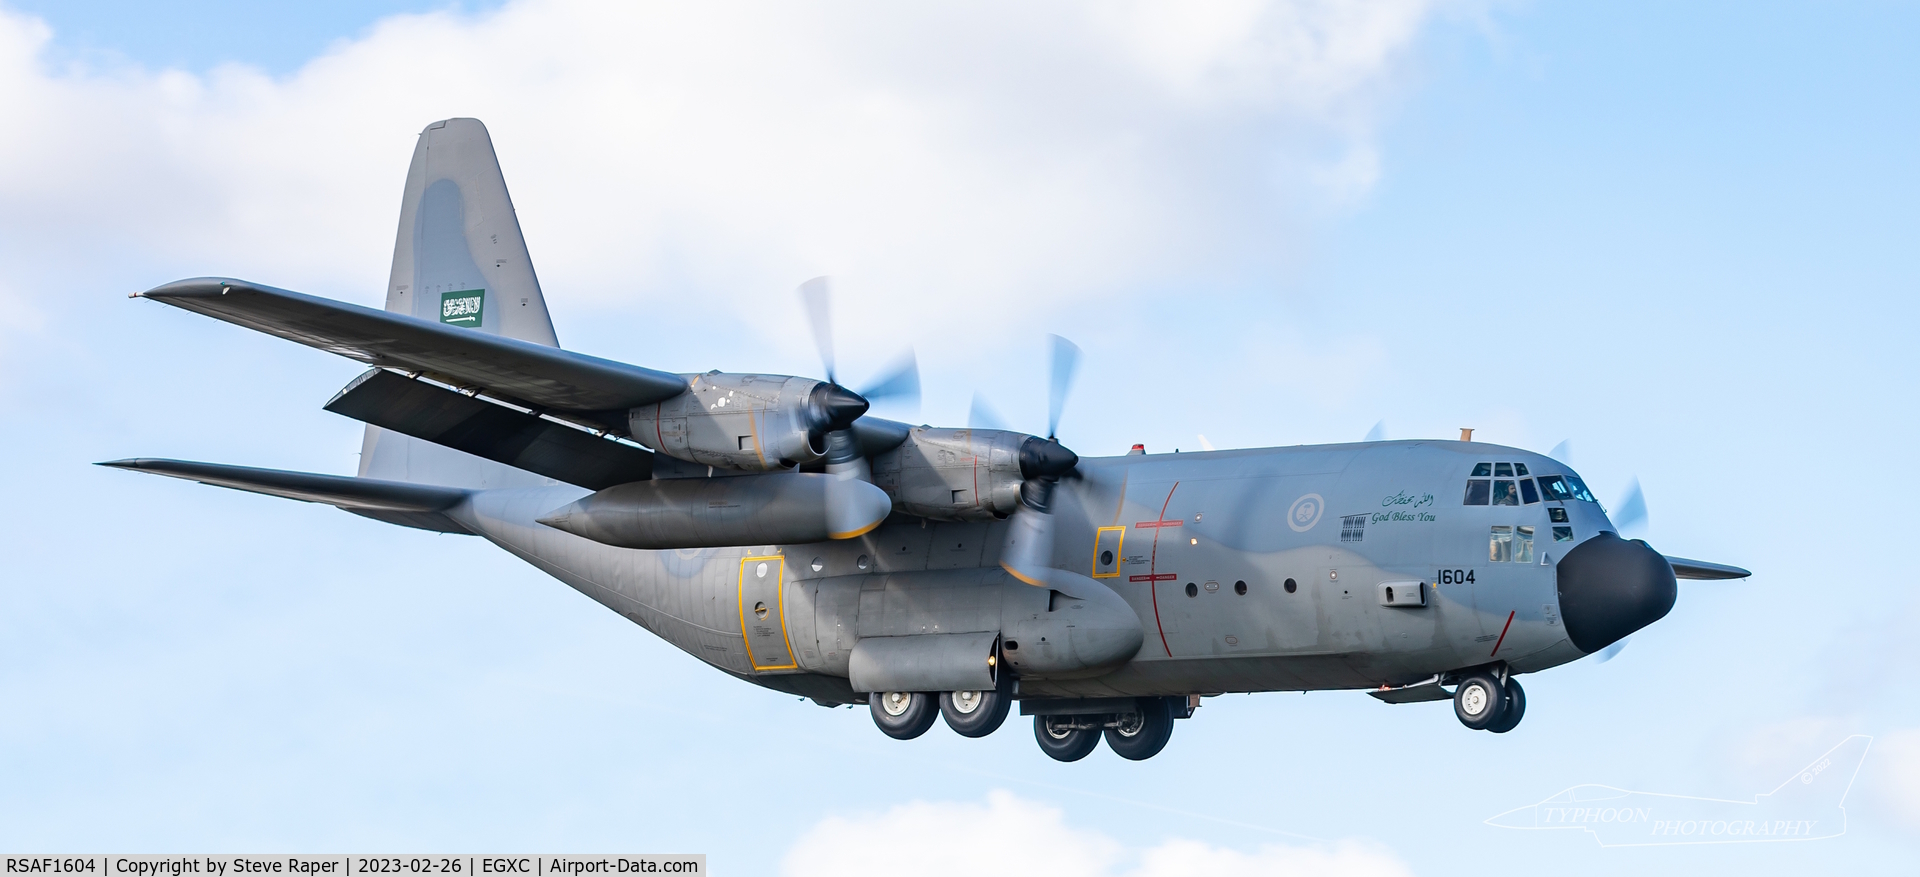 RSAF1604, 1975 Lockheed c-130H C/N 4633, Incoming for Exercise Cobra Warrior RAF Coningsby 
Royal Saudi Air Force support crew.